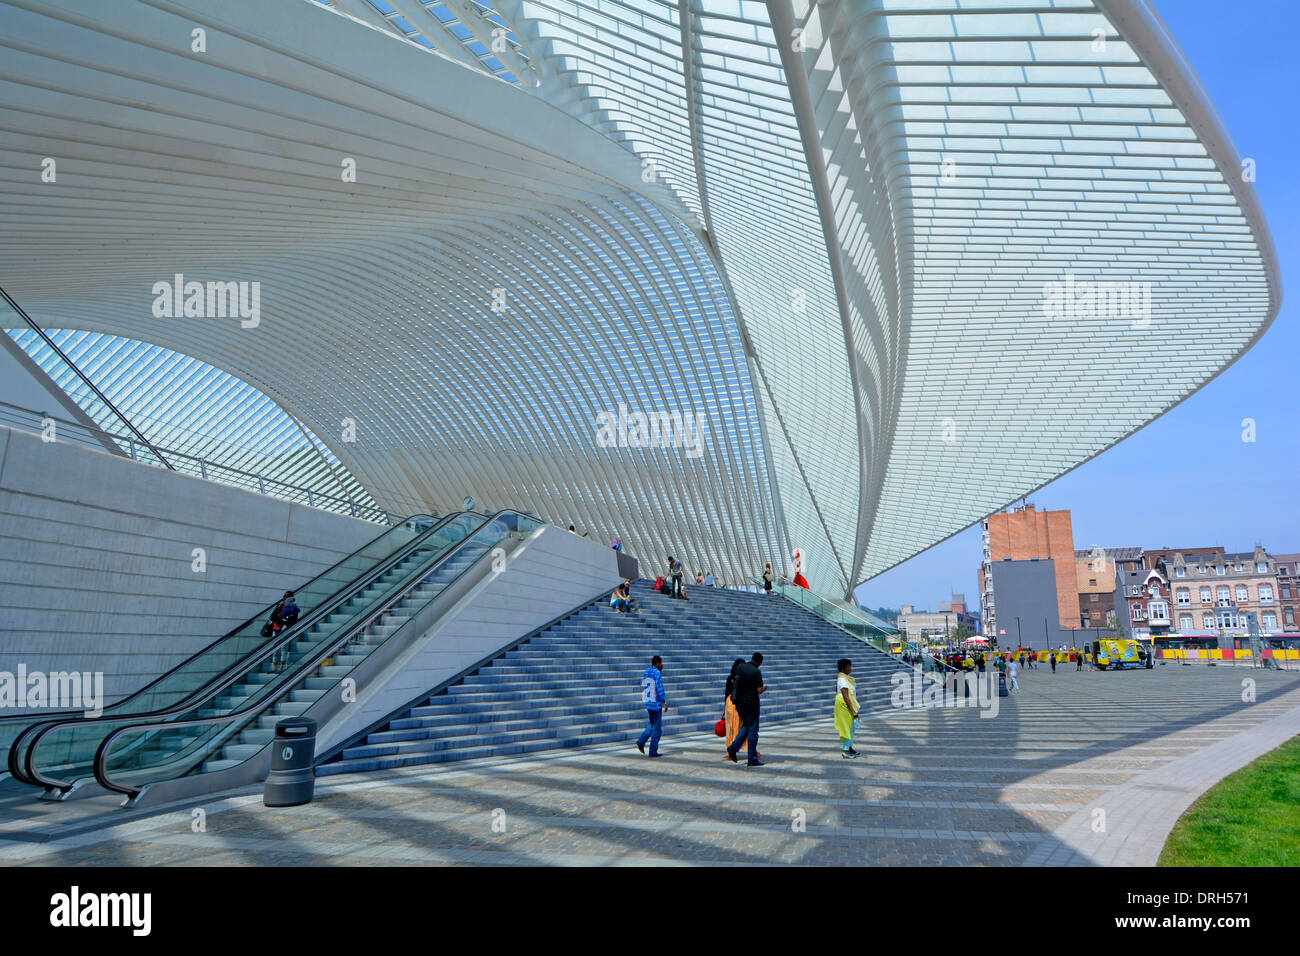 Exterior of futuristic shape modern glass ceiling & roof covering train station & entrance at Liege Belgium public transport infrastructure building Stock Photo